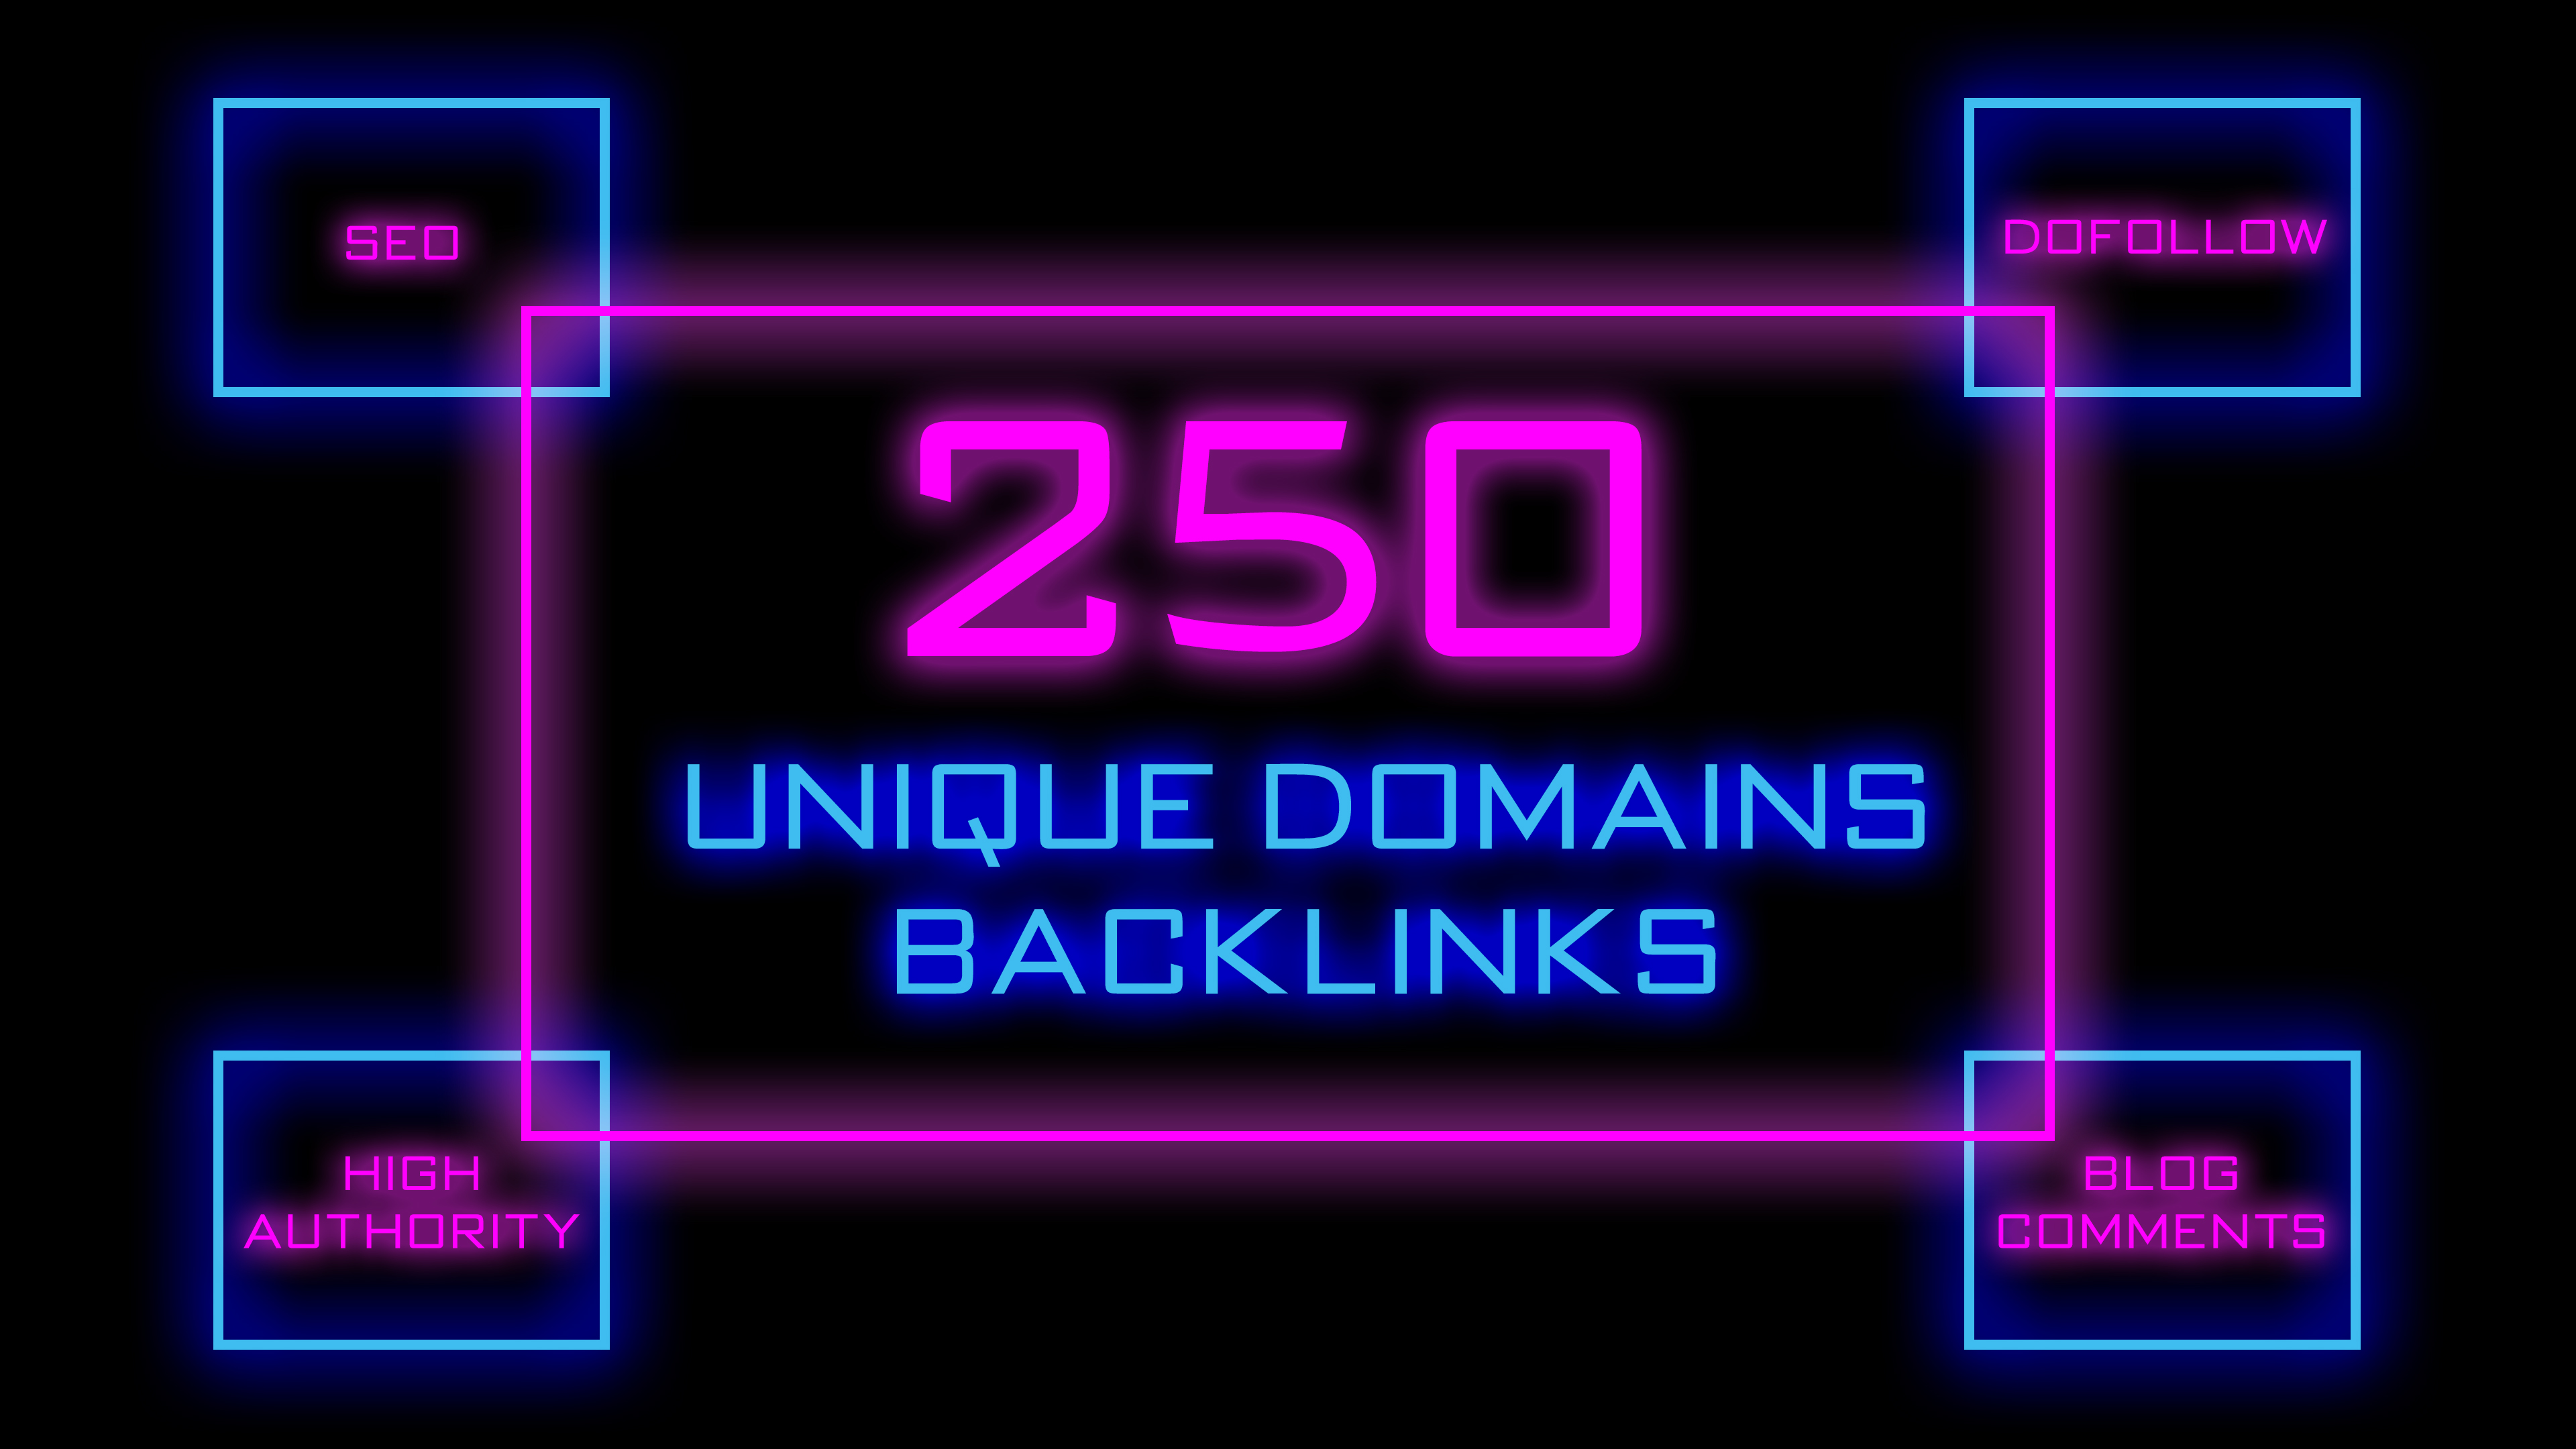 Skyrocket Your Website Rankings With 250 High Authority Unique Domains Backlinks